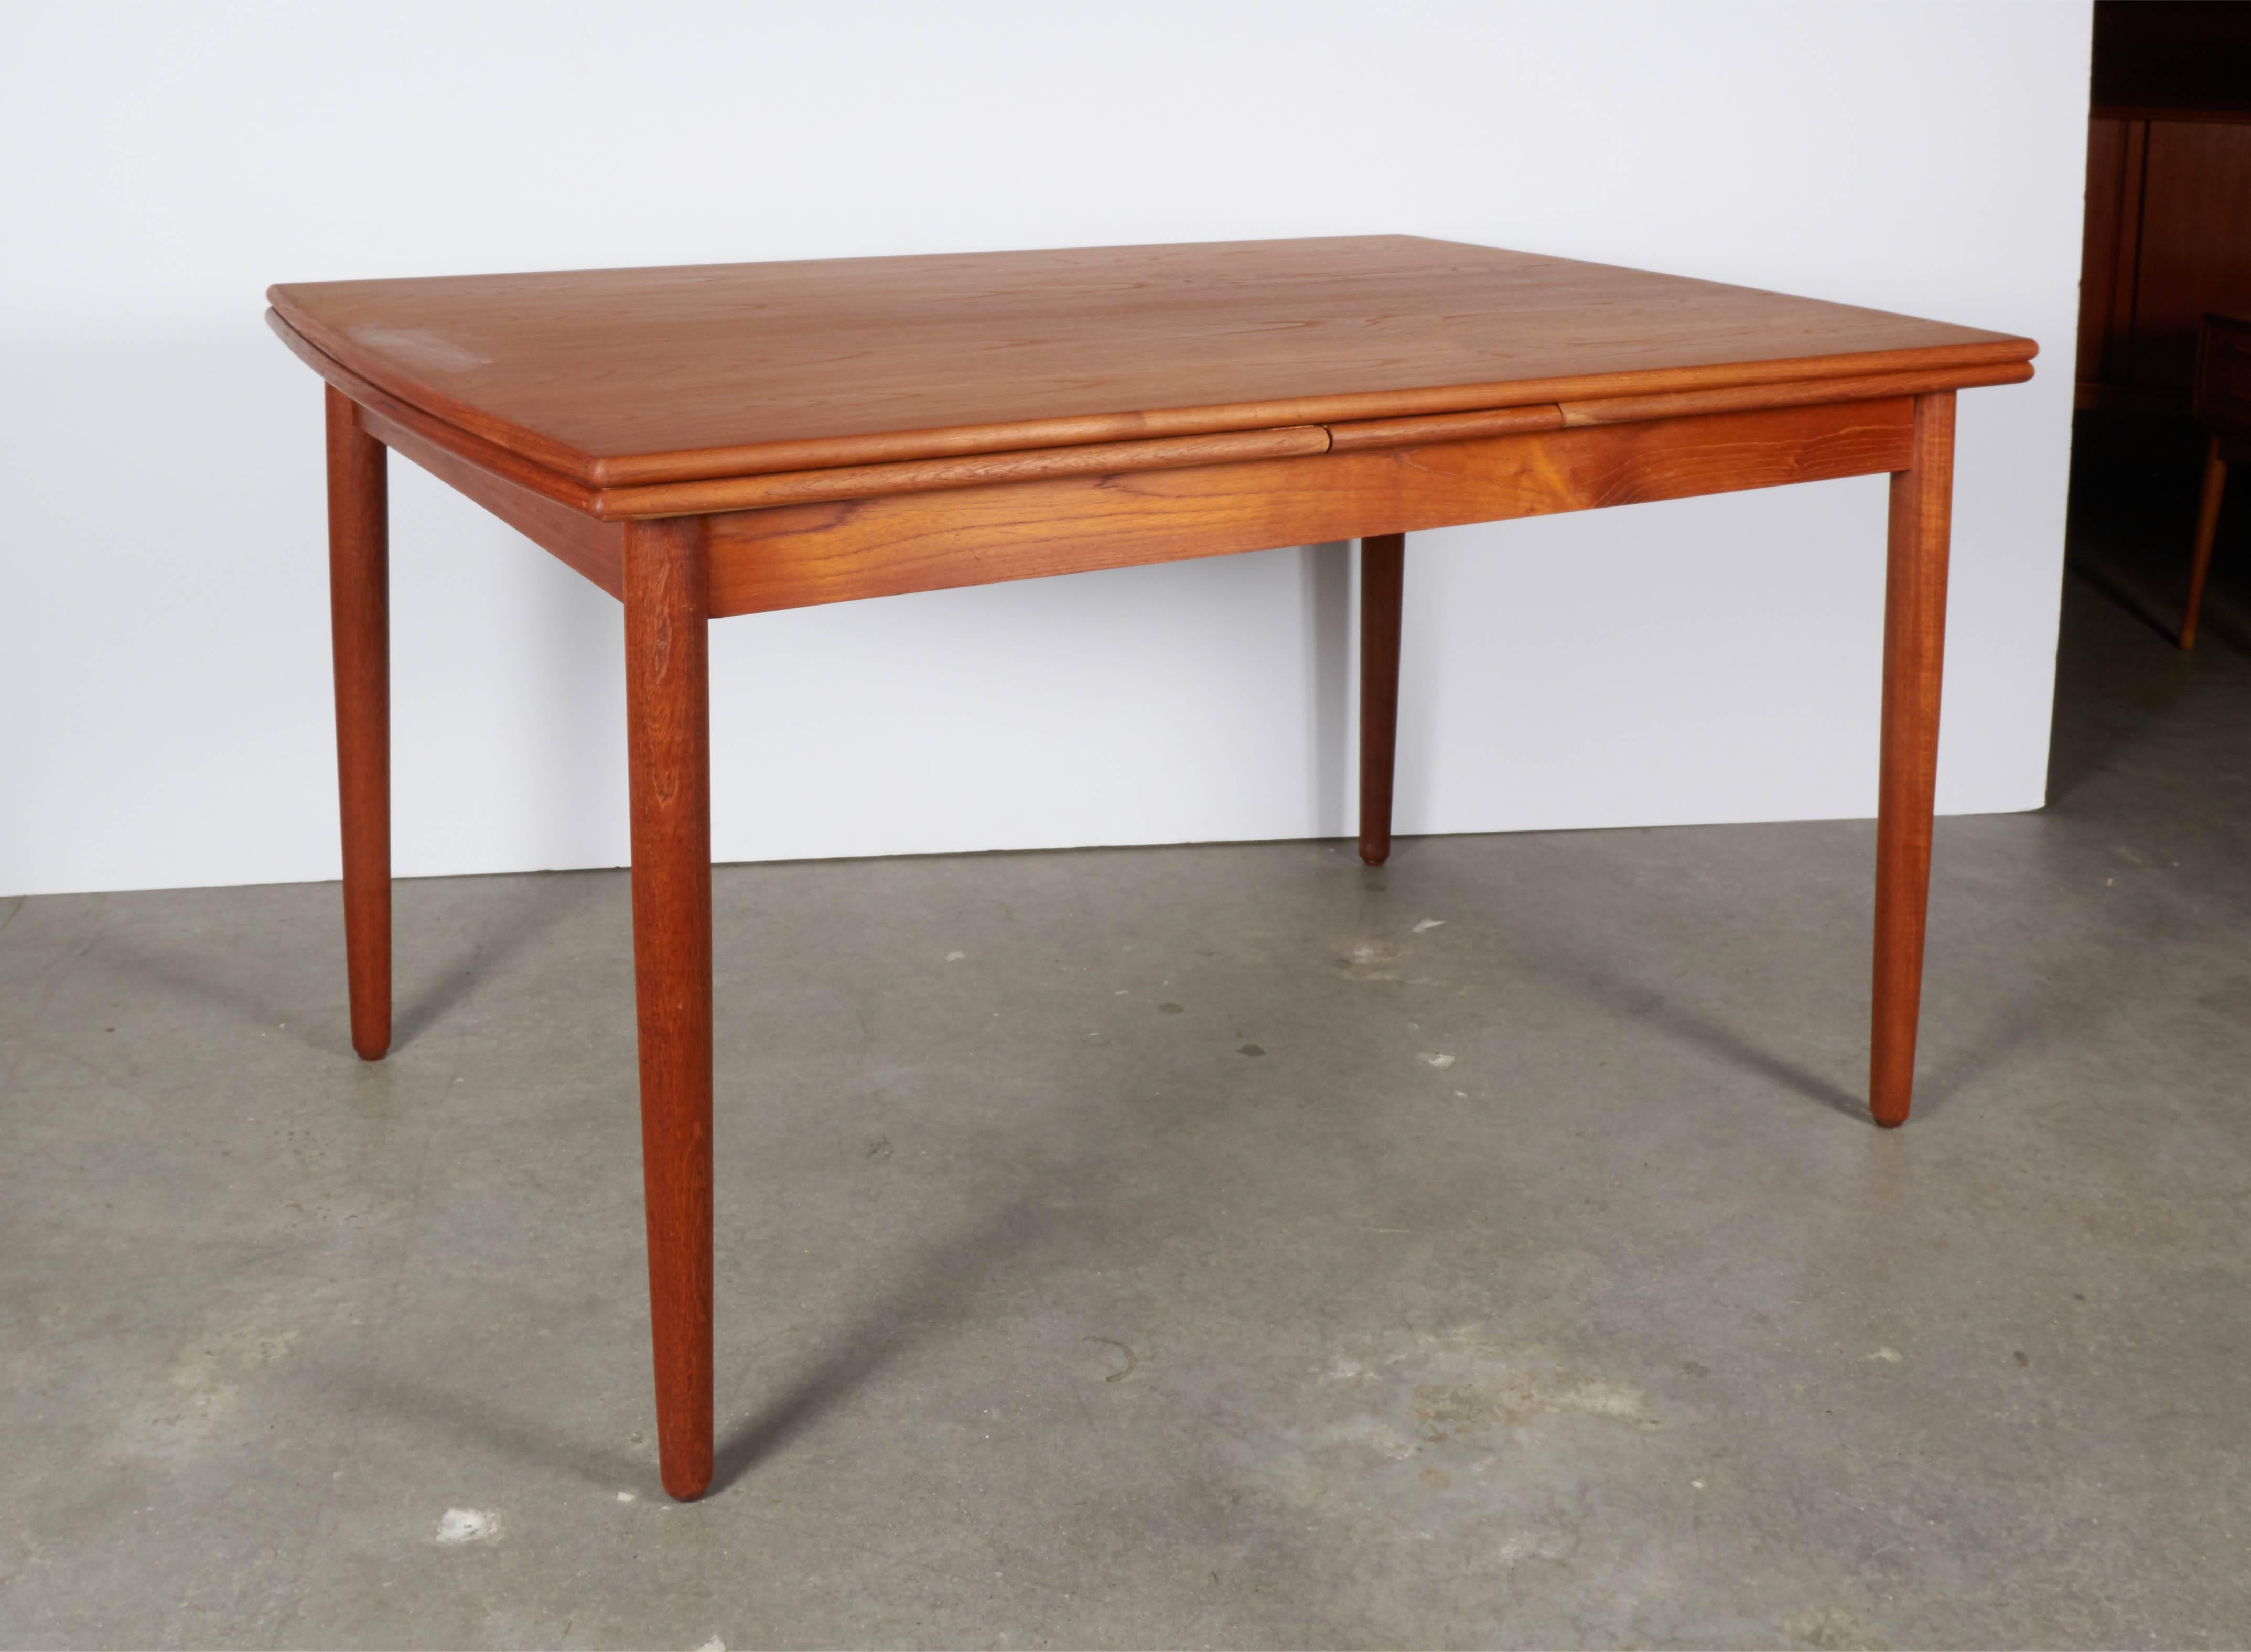 Vintage 1950s, rectangle dining table with two Leaves

This dining table is in excellent condition and is also expandable. The measures of leaves are 19.25" each and pull out from either side. Seats ten.